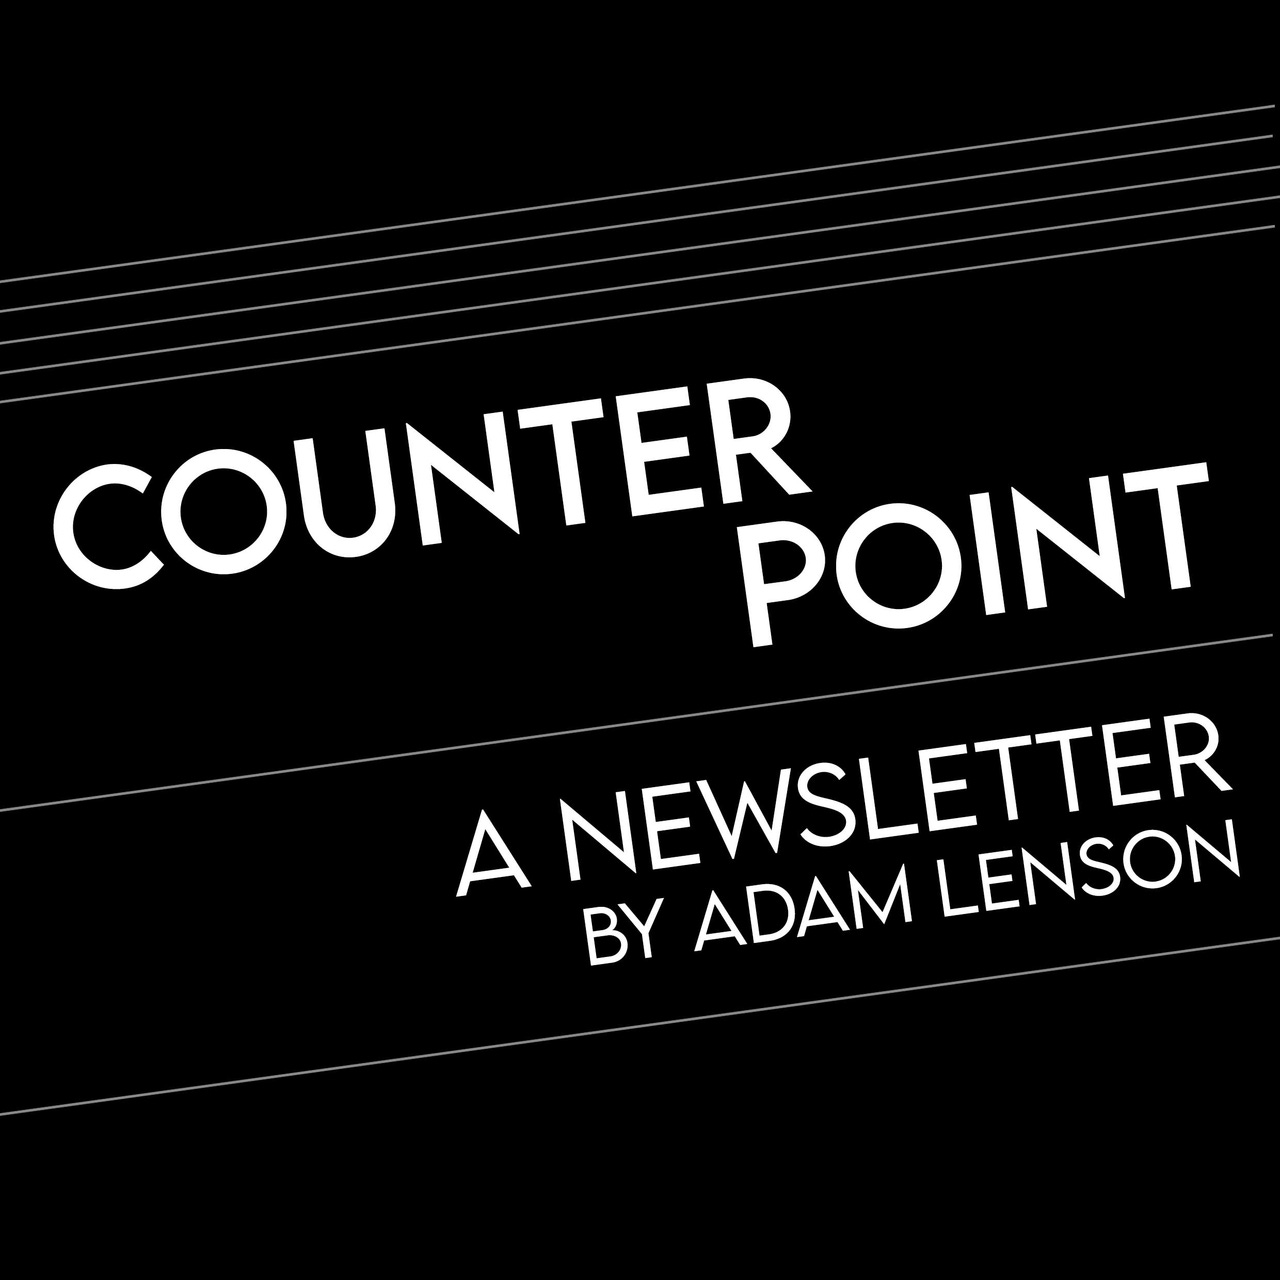 COUNTERPOINT by Adam Lenson